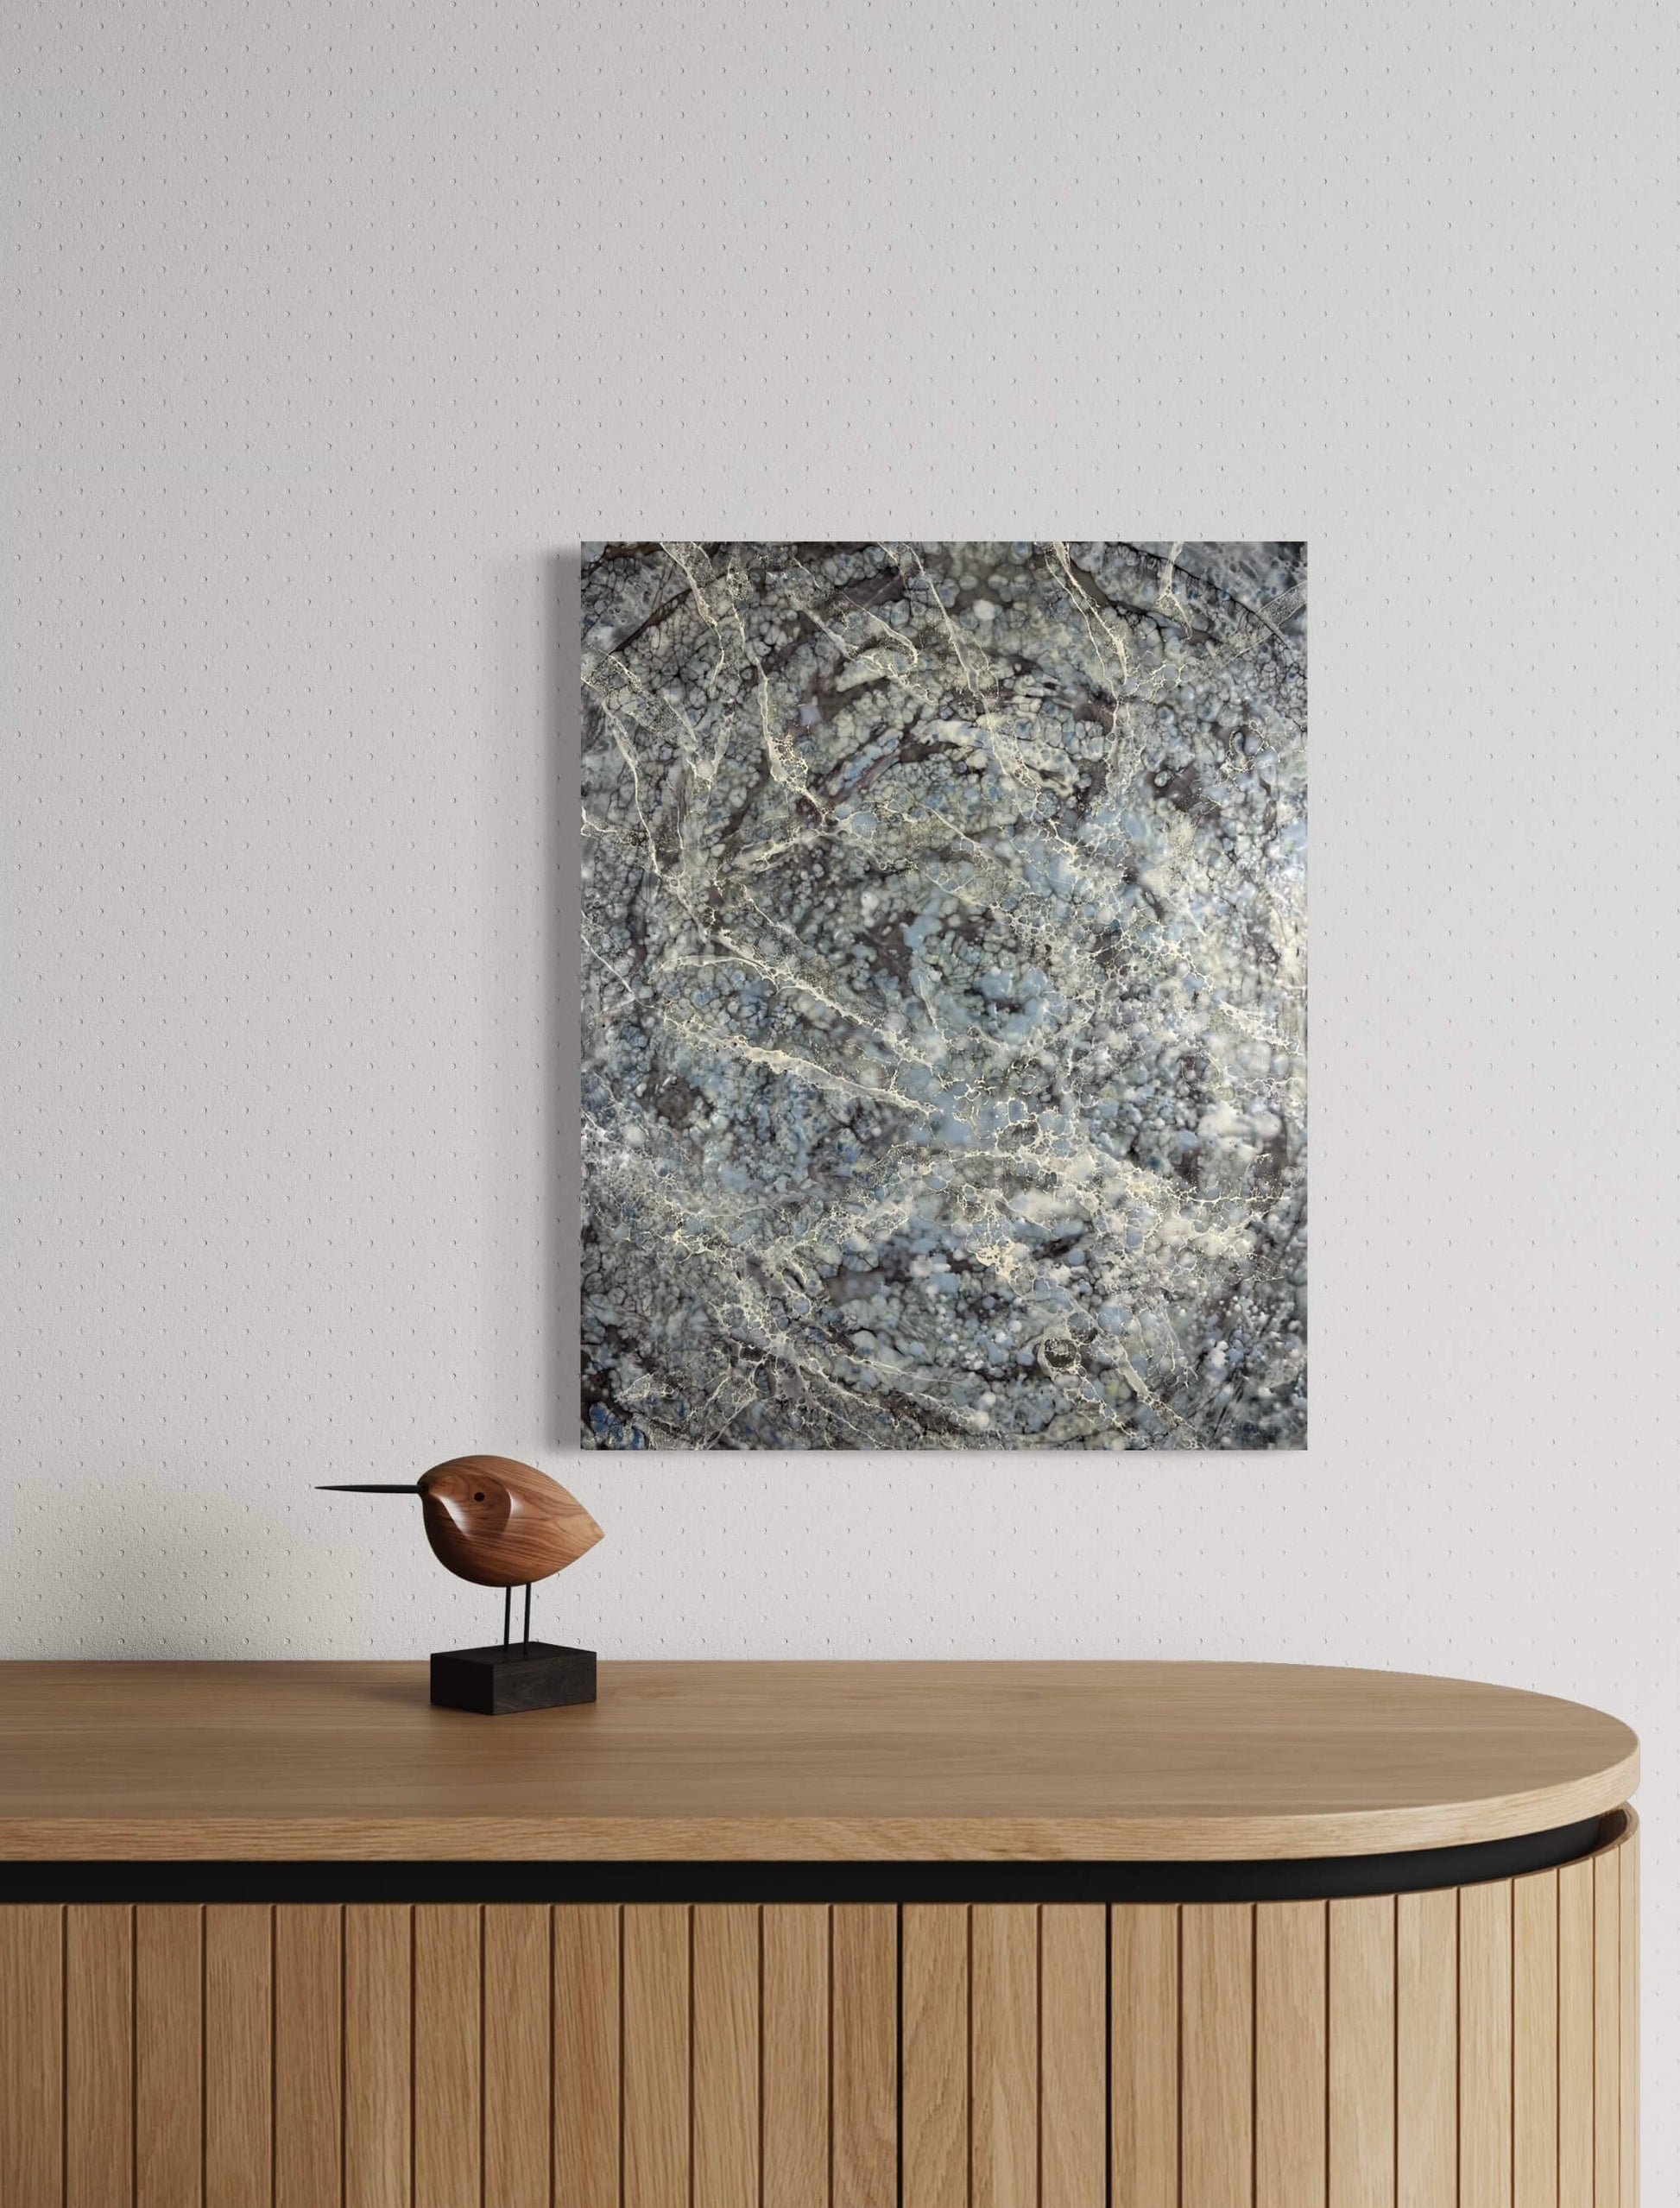 In situ.This painting is created in greys and blues. The dark shellac in the background, creates a downward spiral, as if you are falling into abyss. The white shellac on the foreground is representing your last breath escaping into the ether.